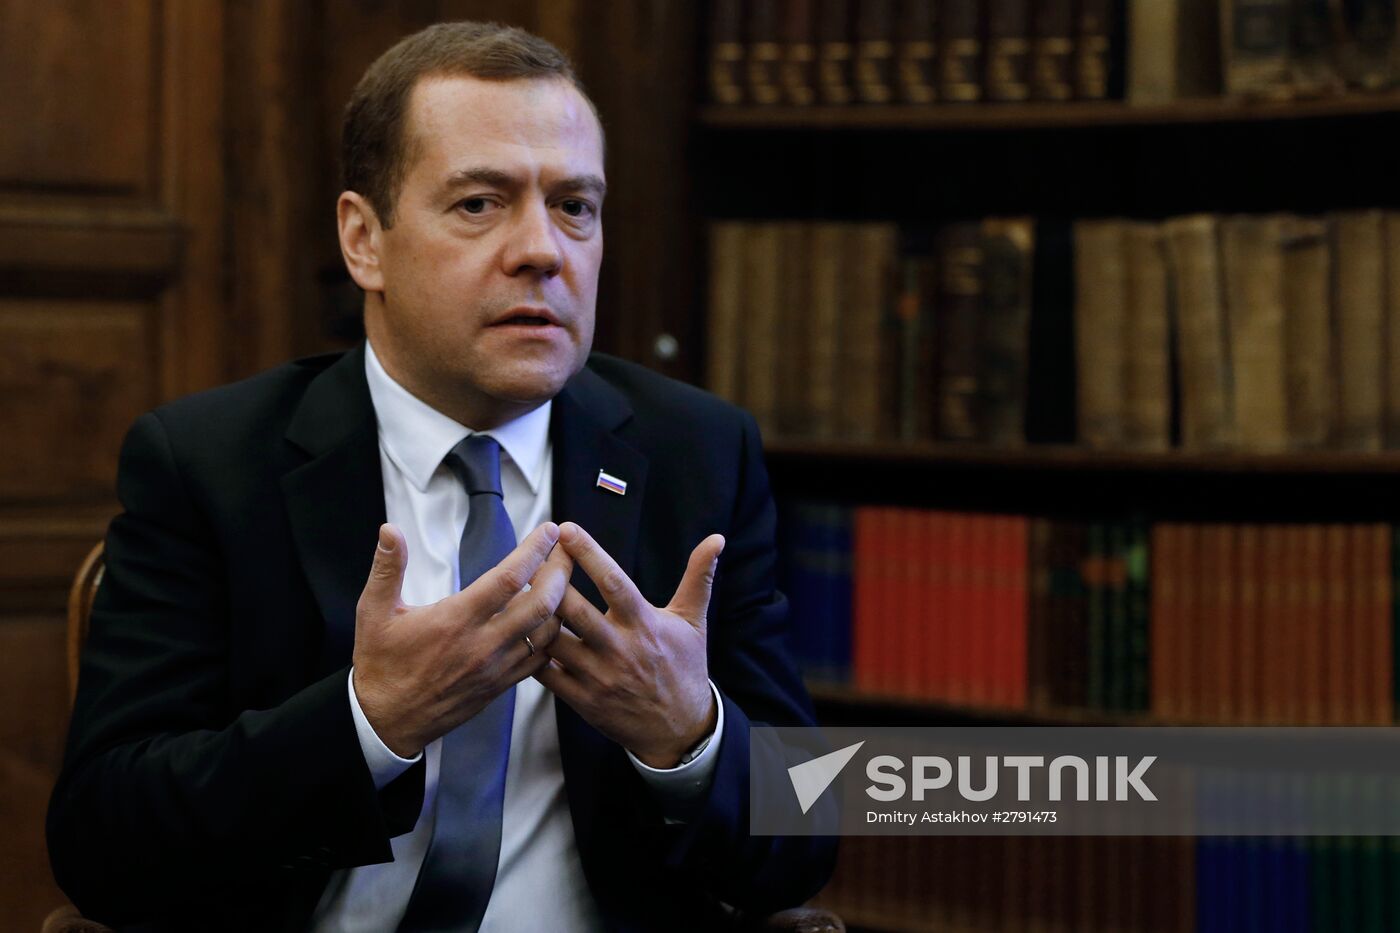 Interview of Russian Prime Minister Dmitry Medvedev to Time magazine